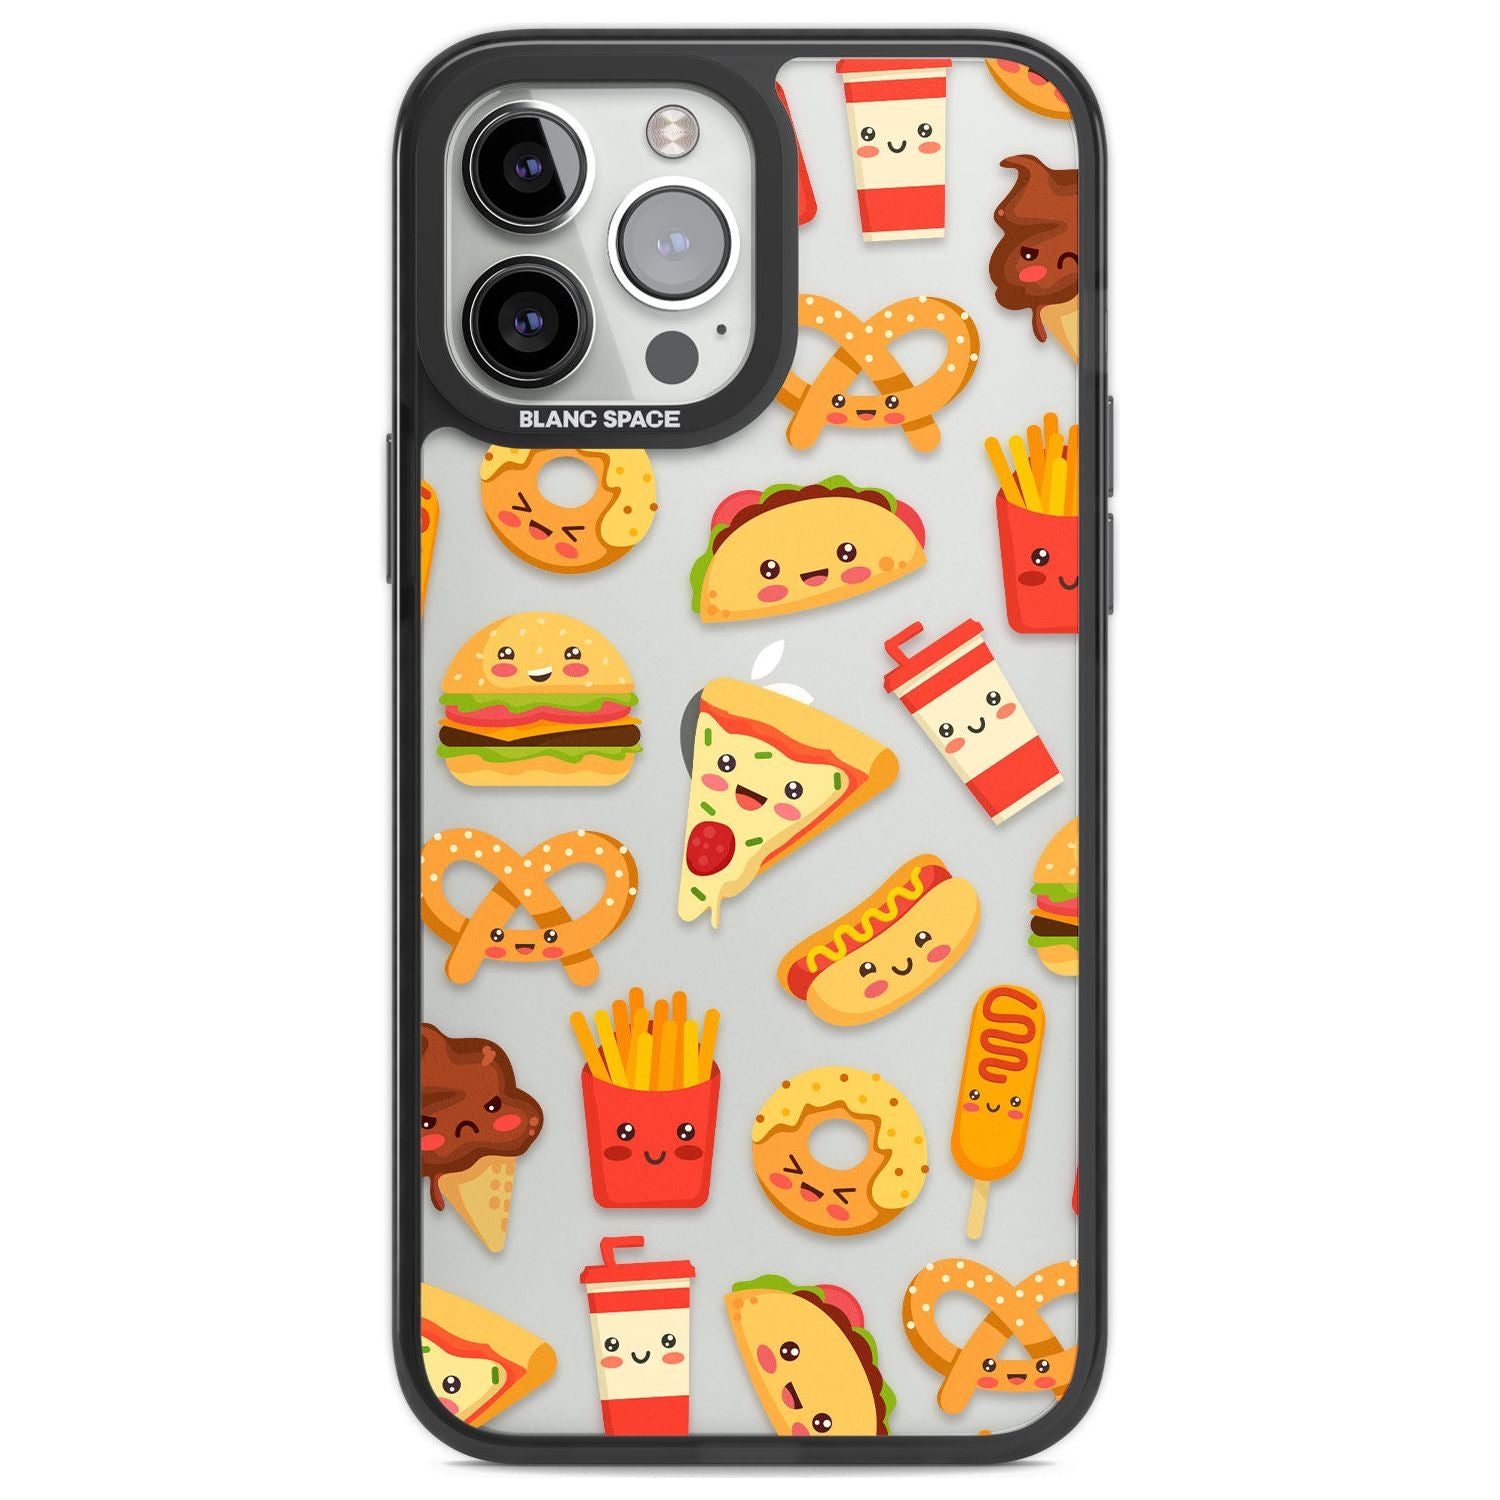 Fast Food Patterns Kawaii Fast Food Mix Phone Case iPhone 14 Pro Max / Black Impact Case,iPhone 13 Pro Max / Black Impact Case Blanc Space